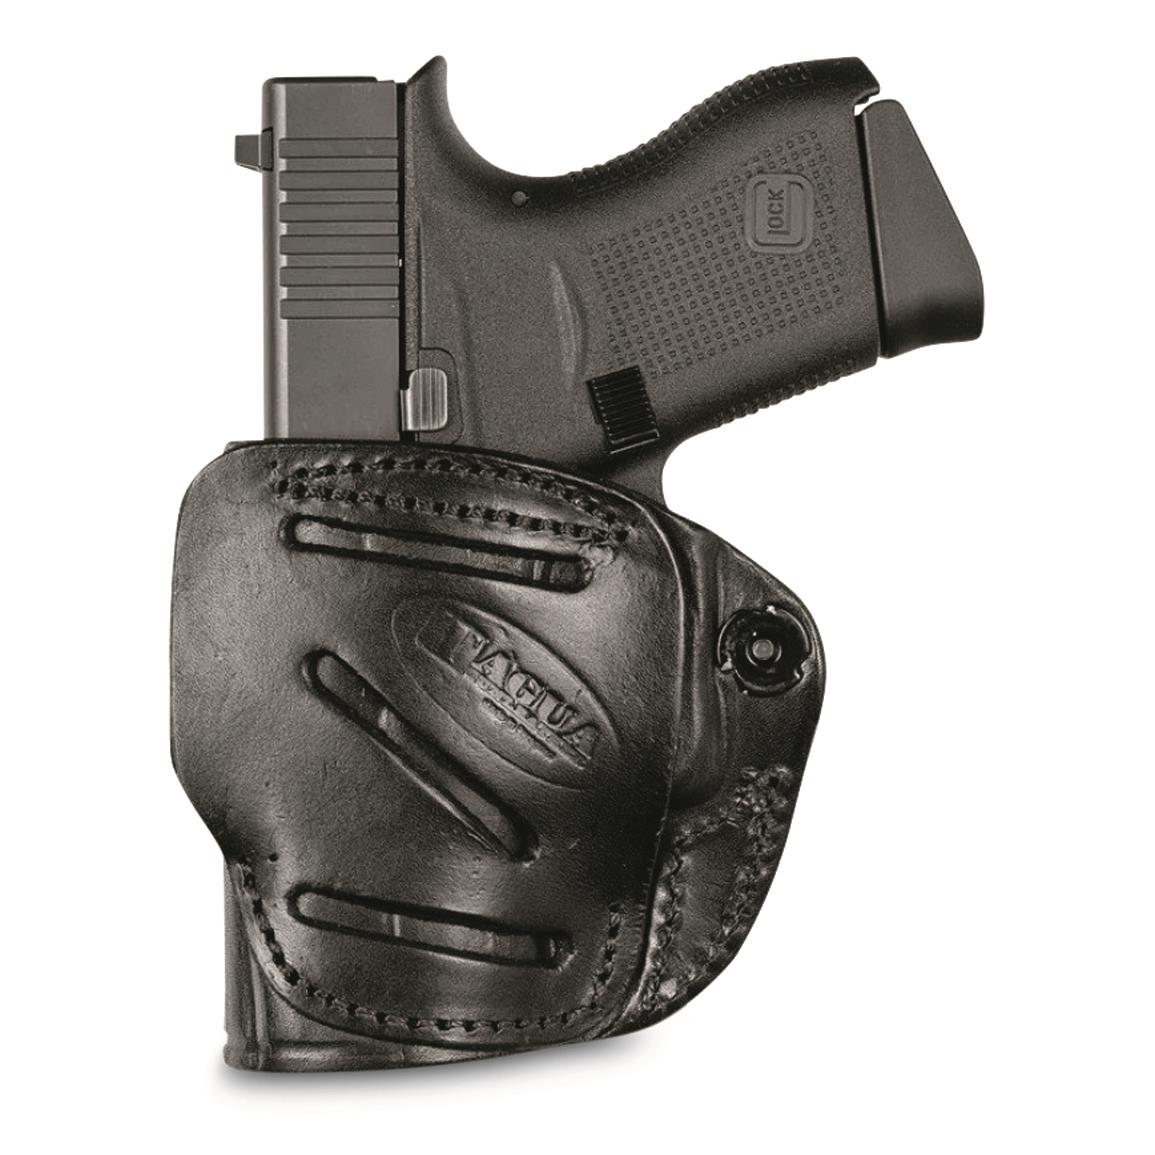 Tagua TX-4 Victory Black Leather Holster, Smith & Wesson M&P Shield/M2.0 3" Barrel